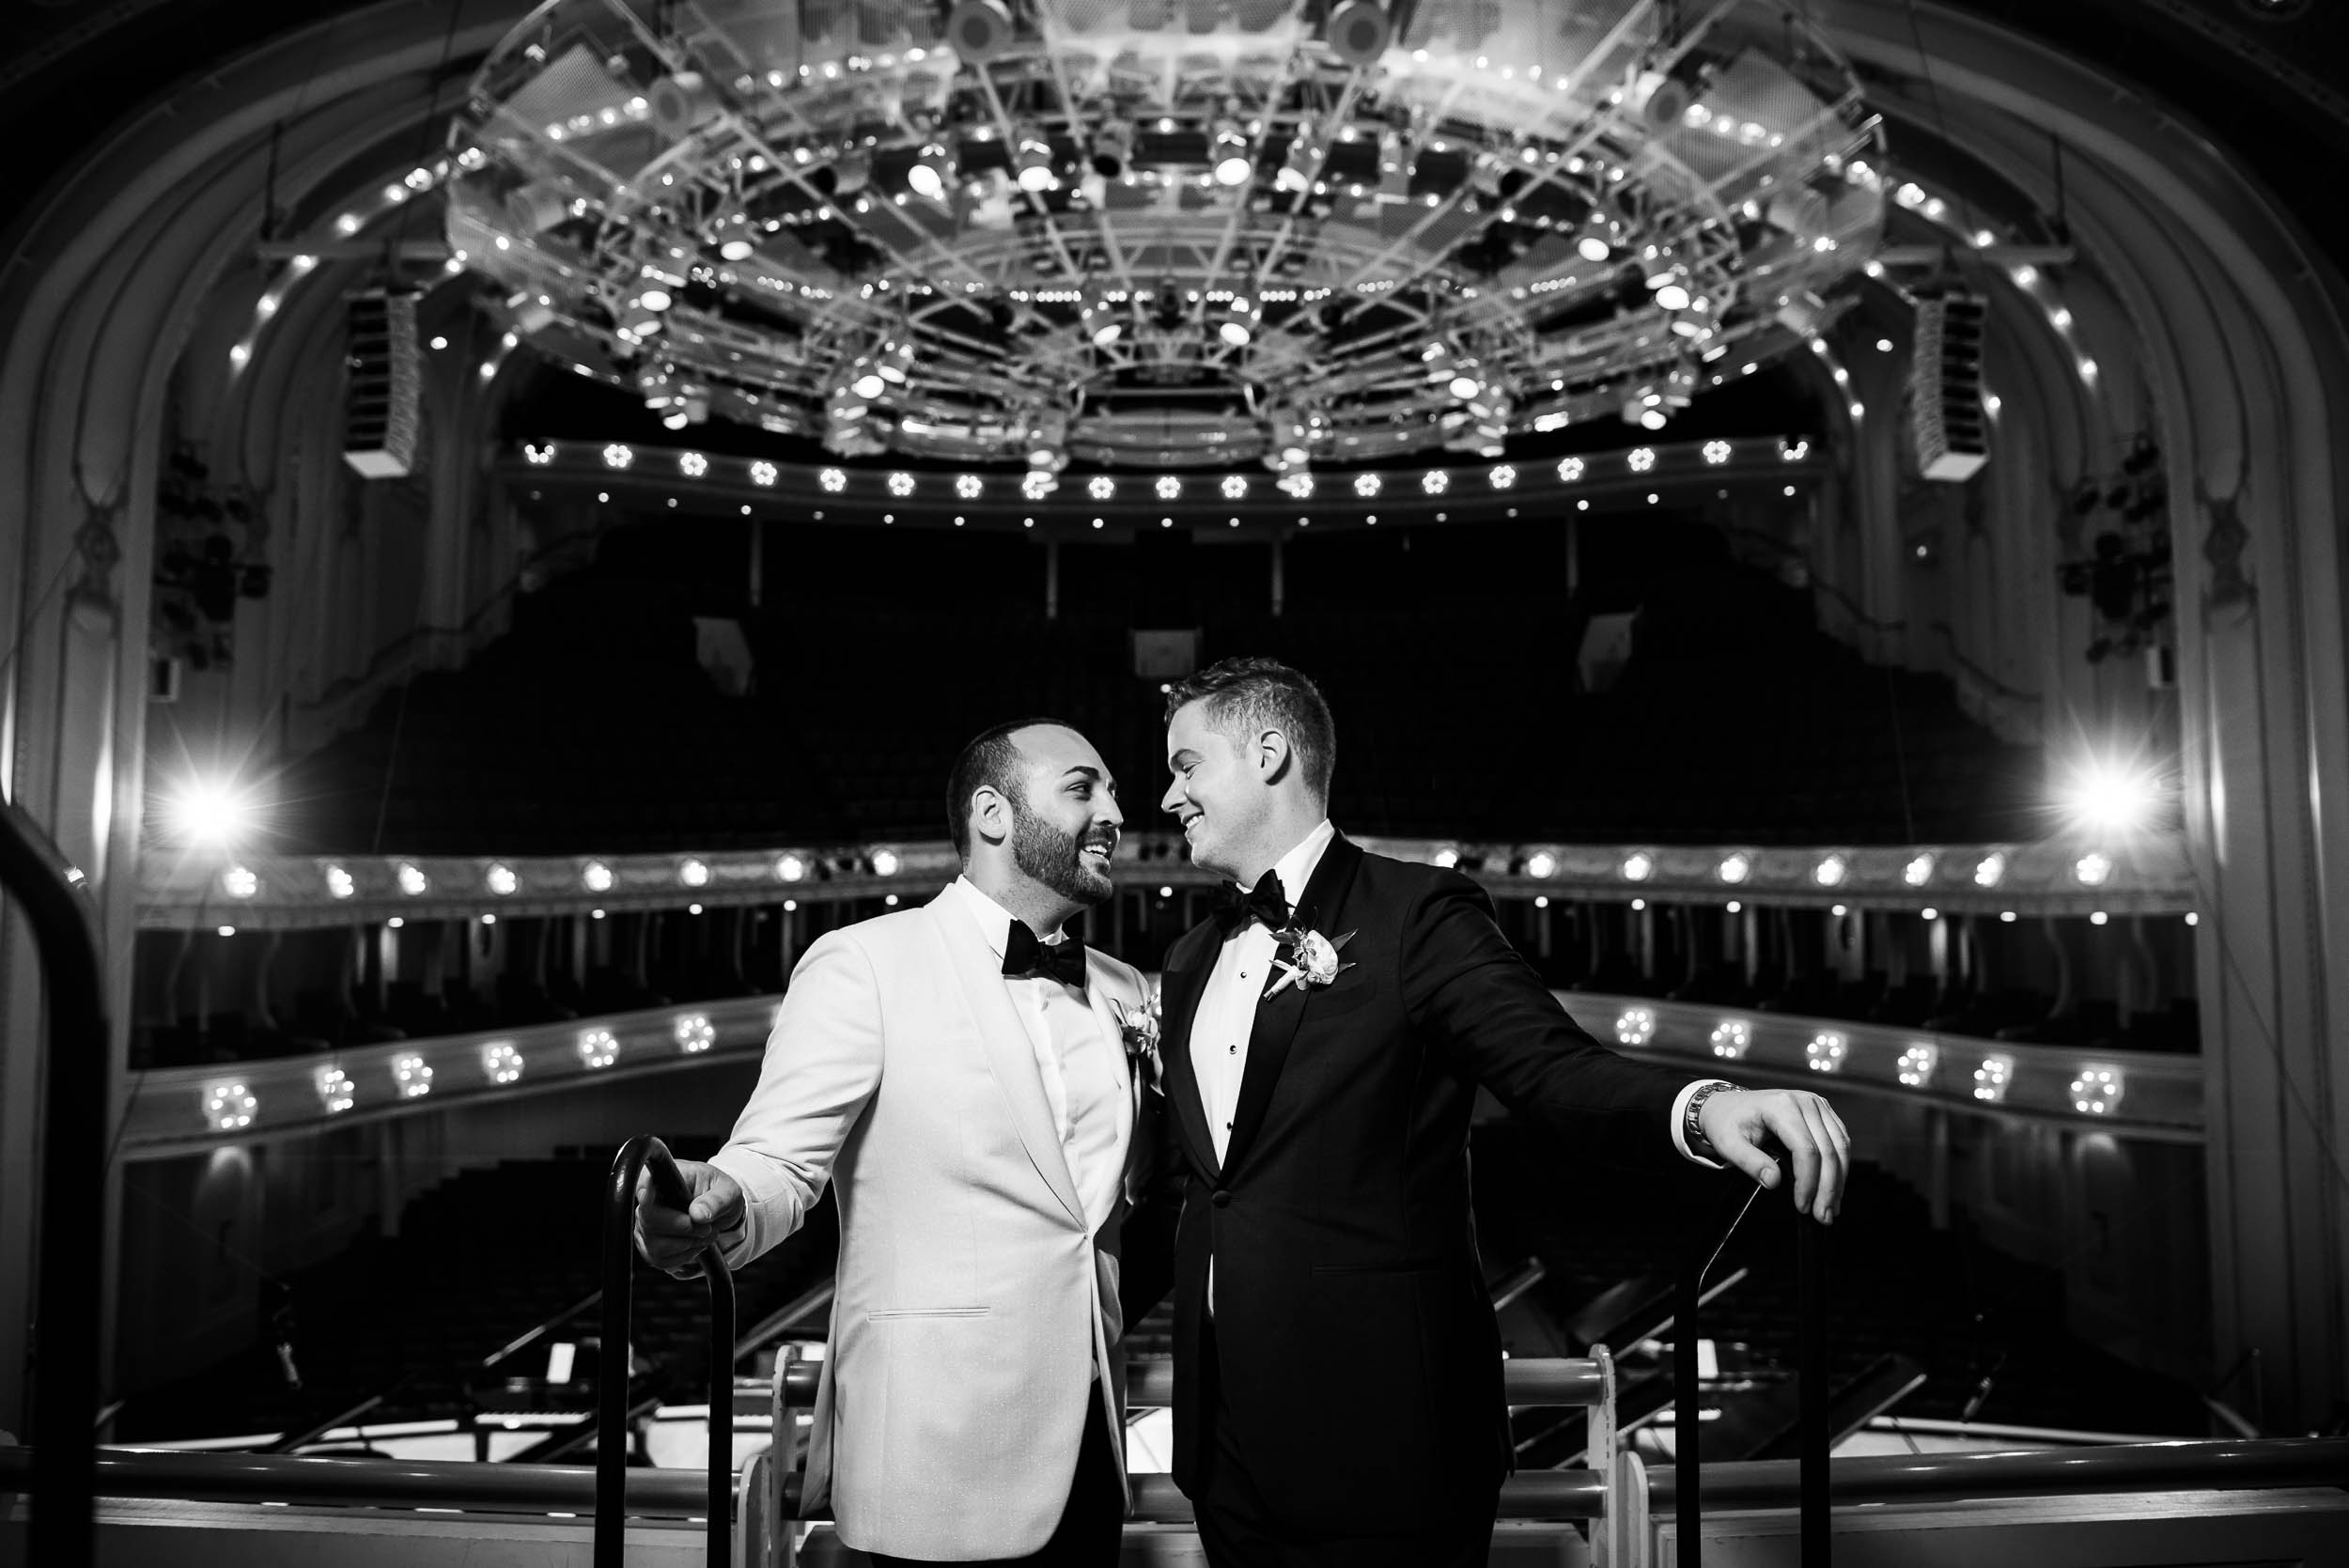 Same-sex, luxurious fall wedding at the Chicago Symphony Center captured by J. Brown Photography. See more wedding ideas at jbrownphotography.com!